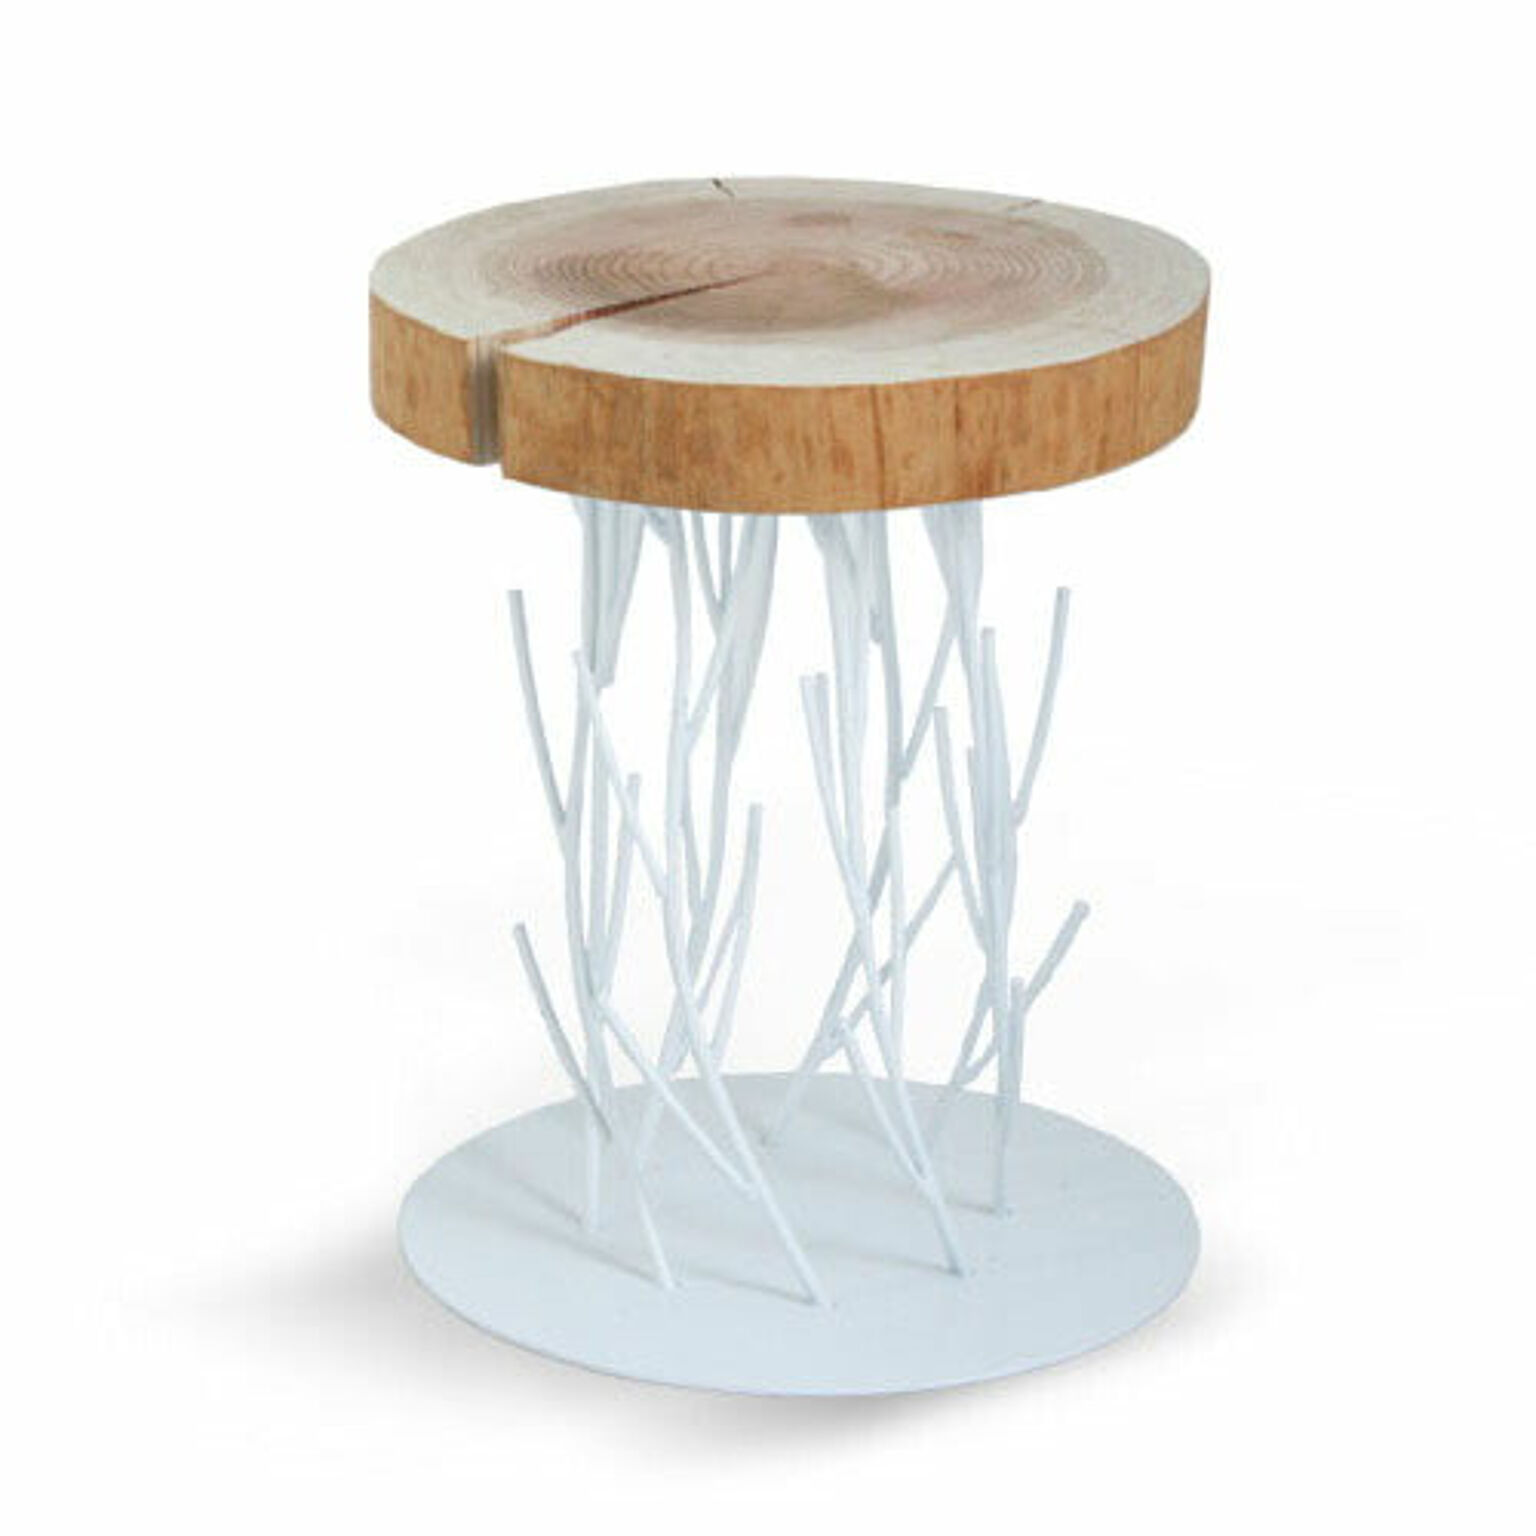 Frasca stool- フラスカ スツール earthliving designed by DI CLASSE EL7001WH 丸椅子 イス チェア